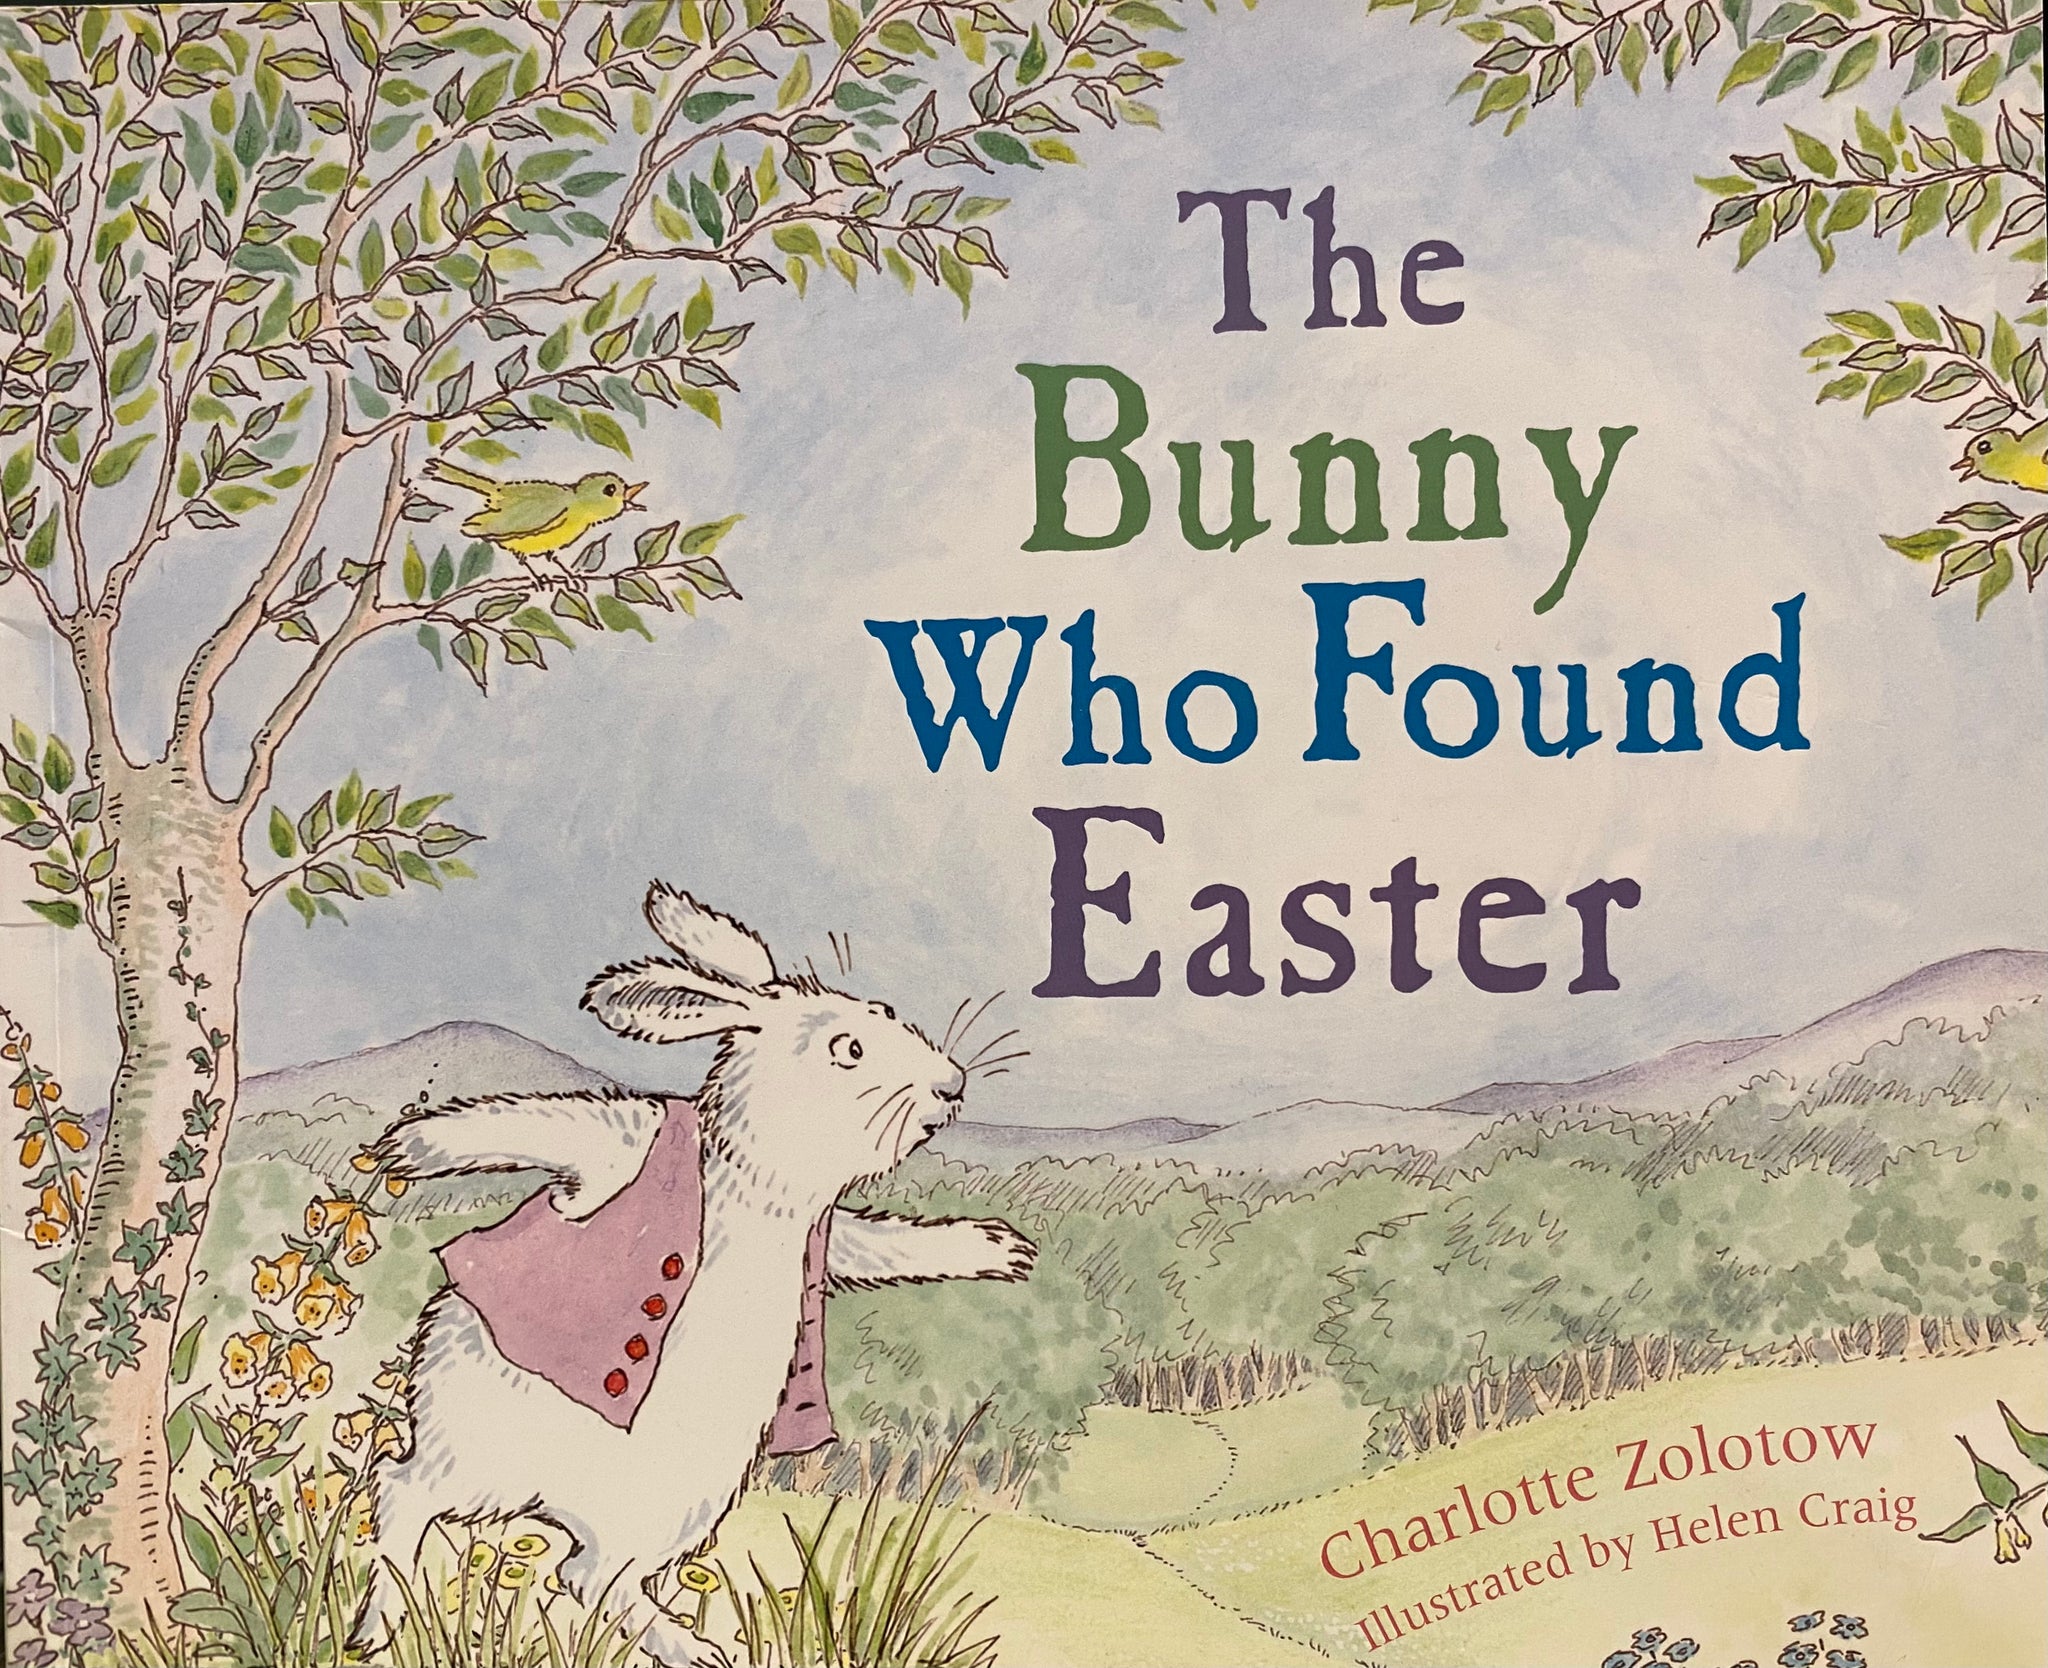 The Bunny Who Found Easter, Charlotte Zolotow